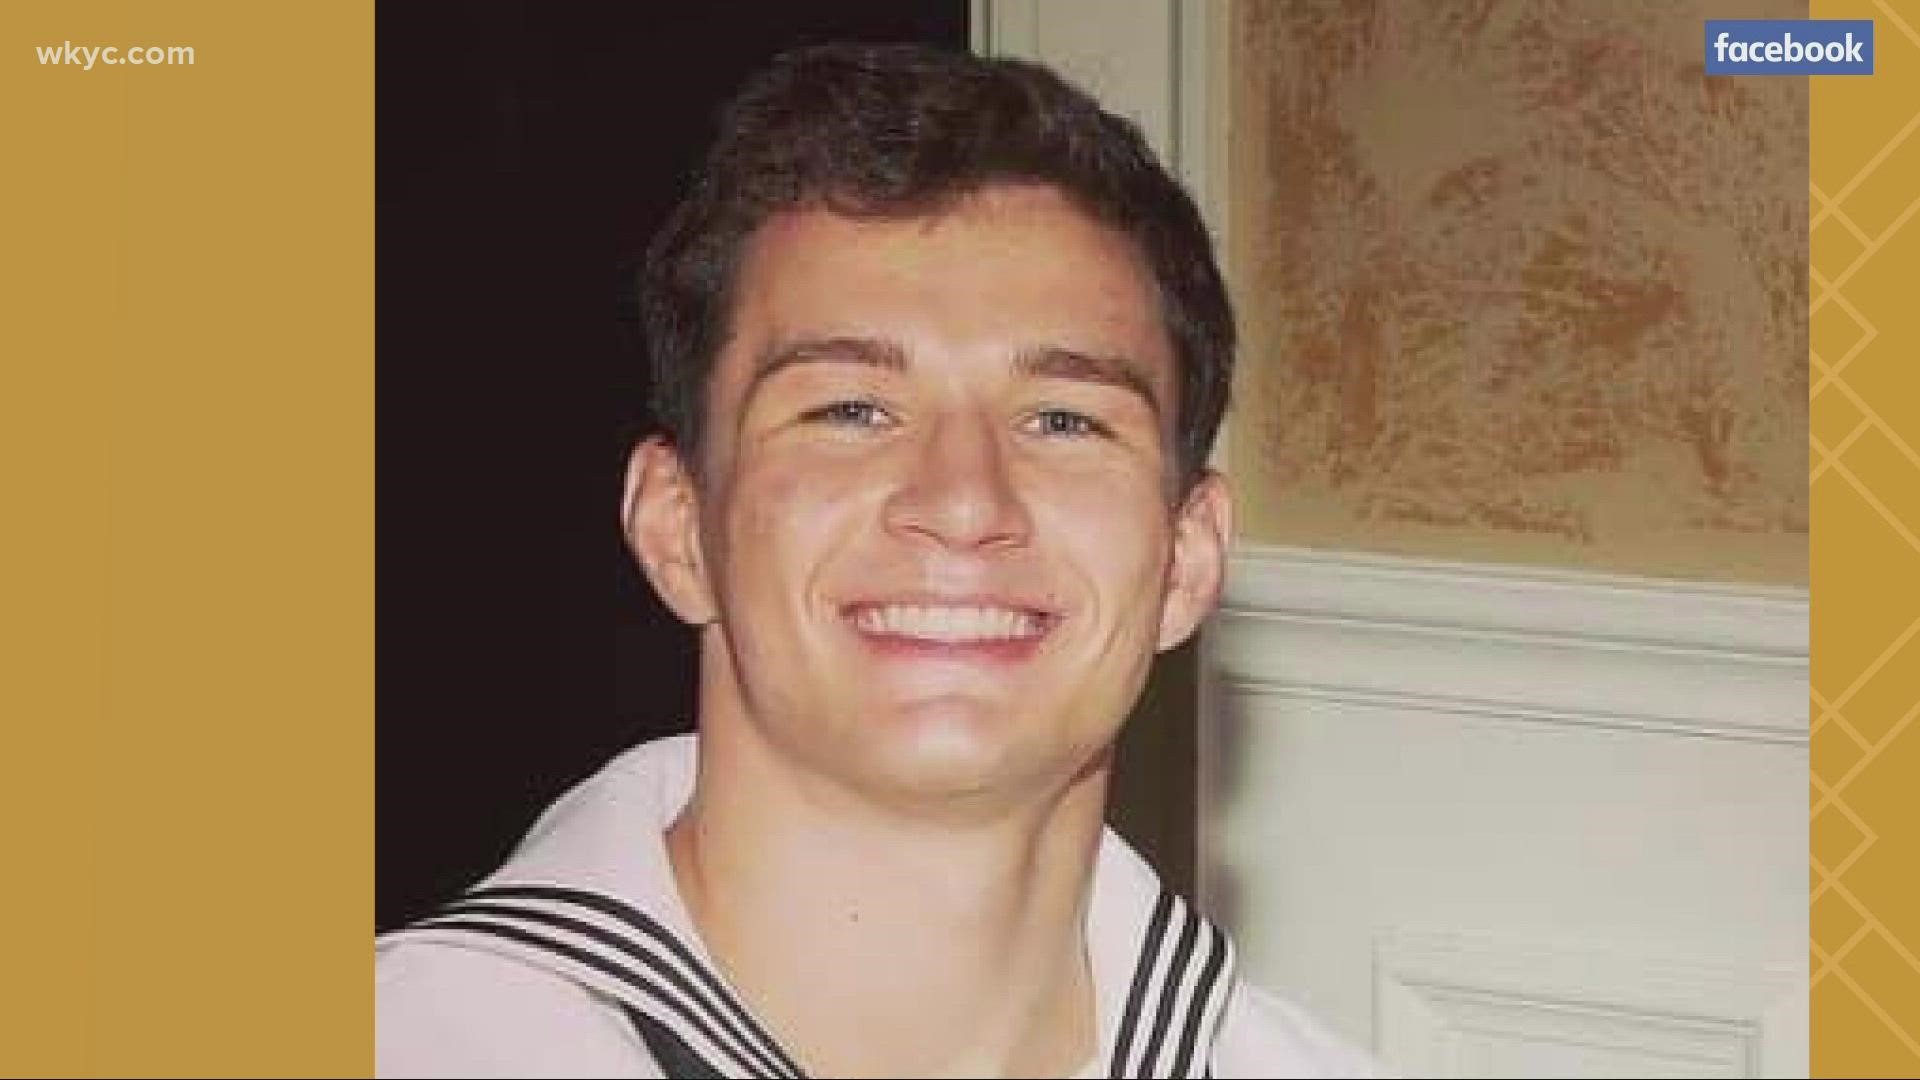 Maxton William Soviak, a corpsman in the U.S. Navy,  and from Erie county in northern Ohio, was among those U-S servicemen killed in the Kabul attack in Afghanistan.